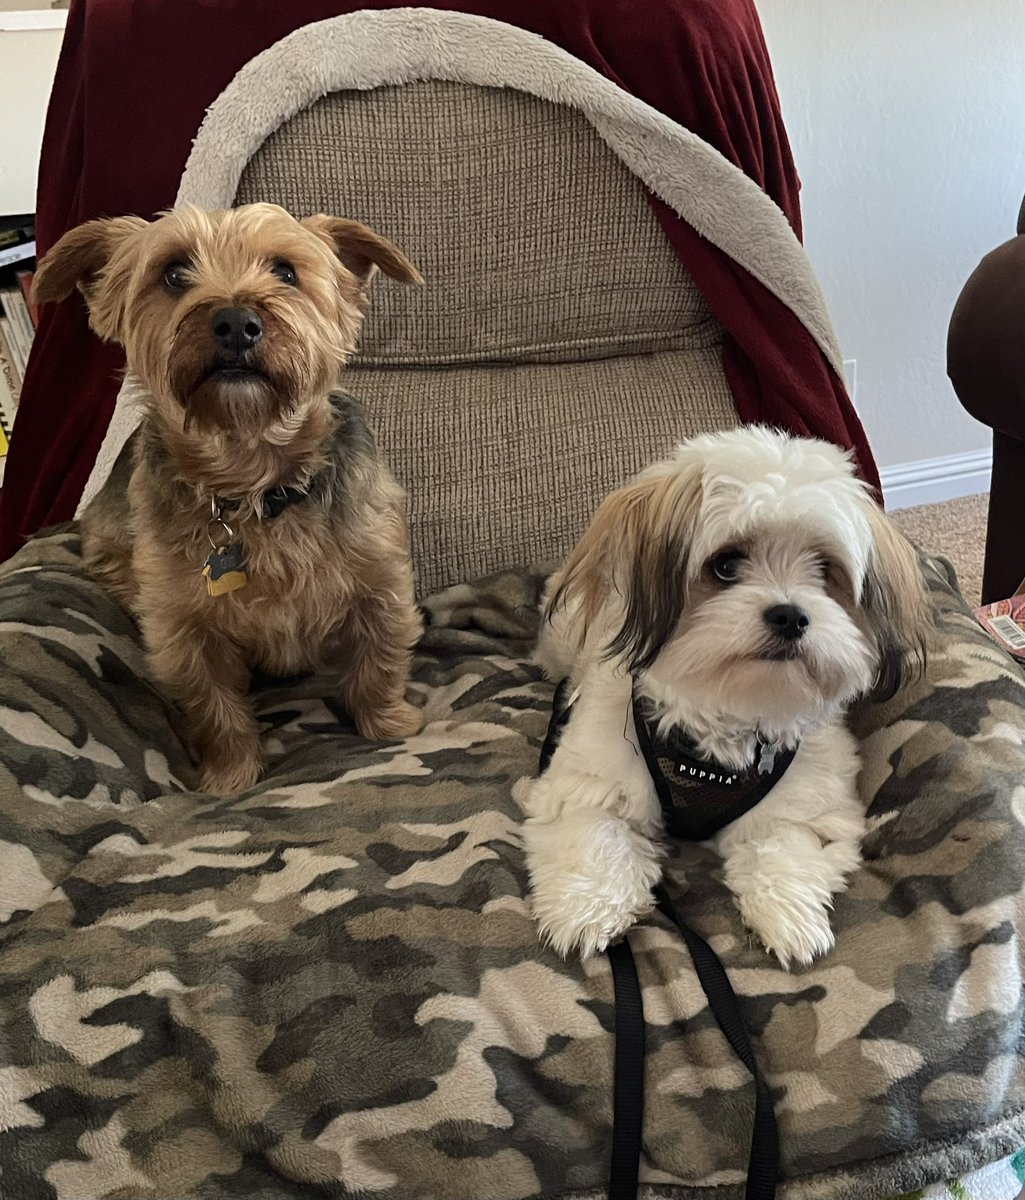 Hi friends it’s Gus and my little bro Gizmo. Gizmo is on his way to the orthopedic doc to find out about fixing his leg, can you guys send some Luck 🍀 his way. Thanks you guys! I let you know what the doc said when mom and Giz get home. Ttyl ❤️🤗🐶🐾🐶🐾